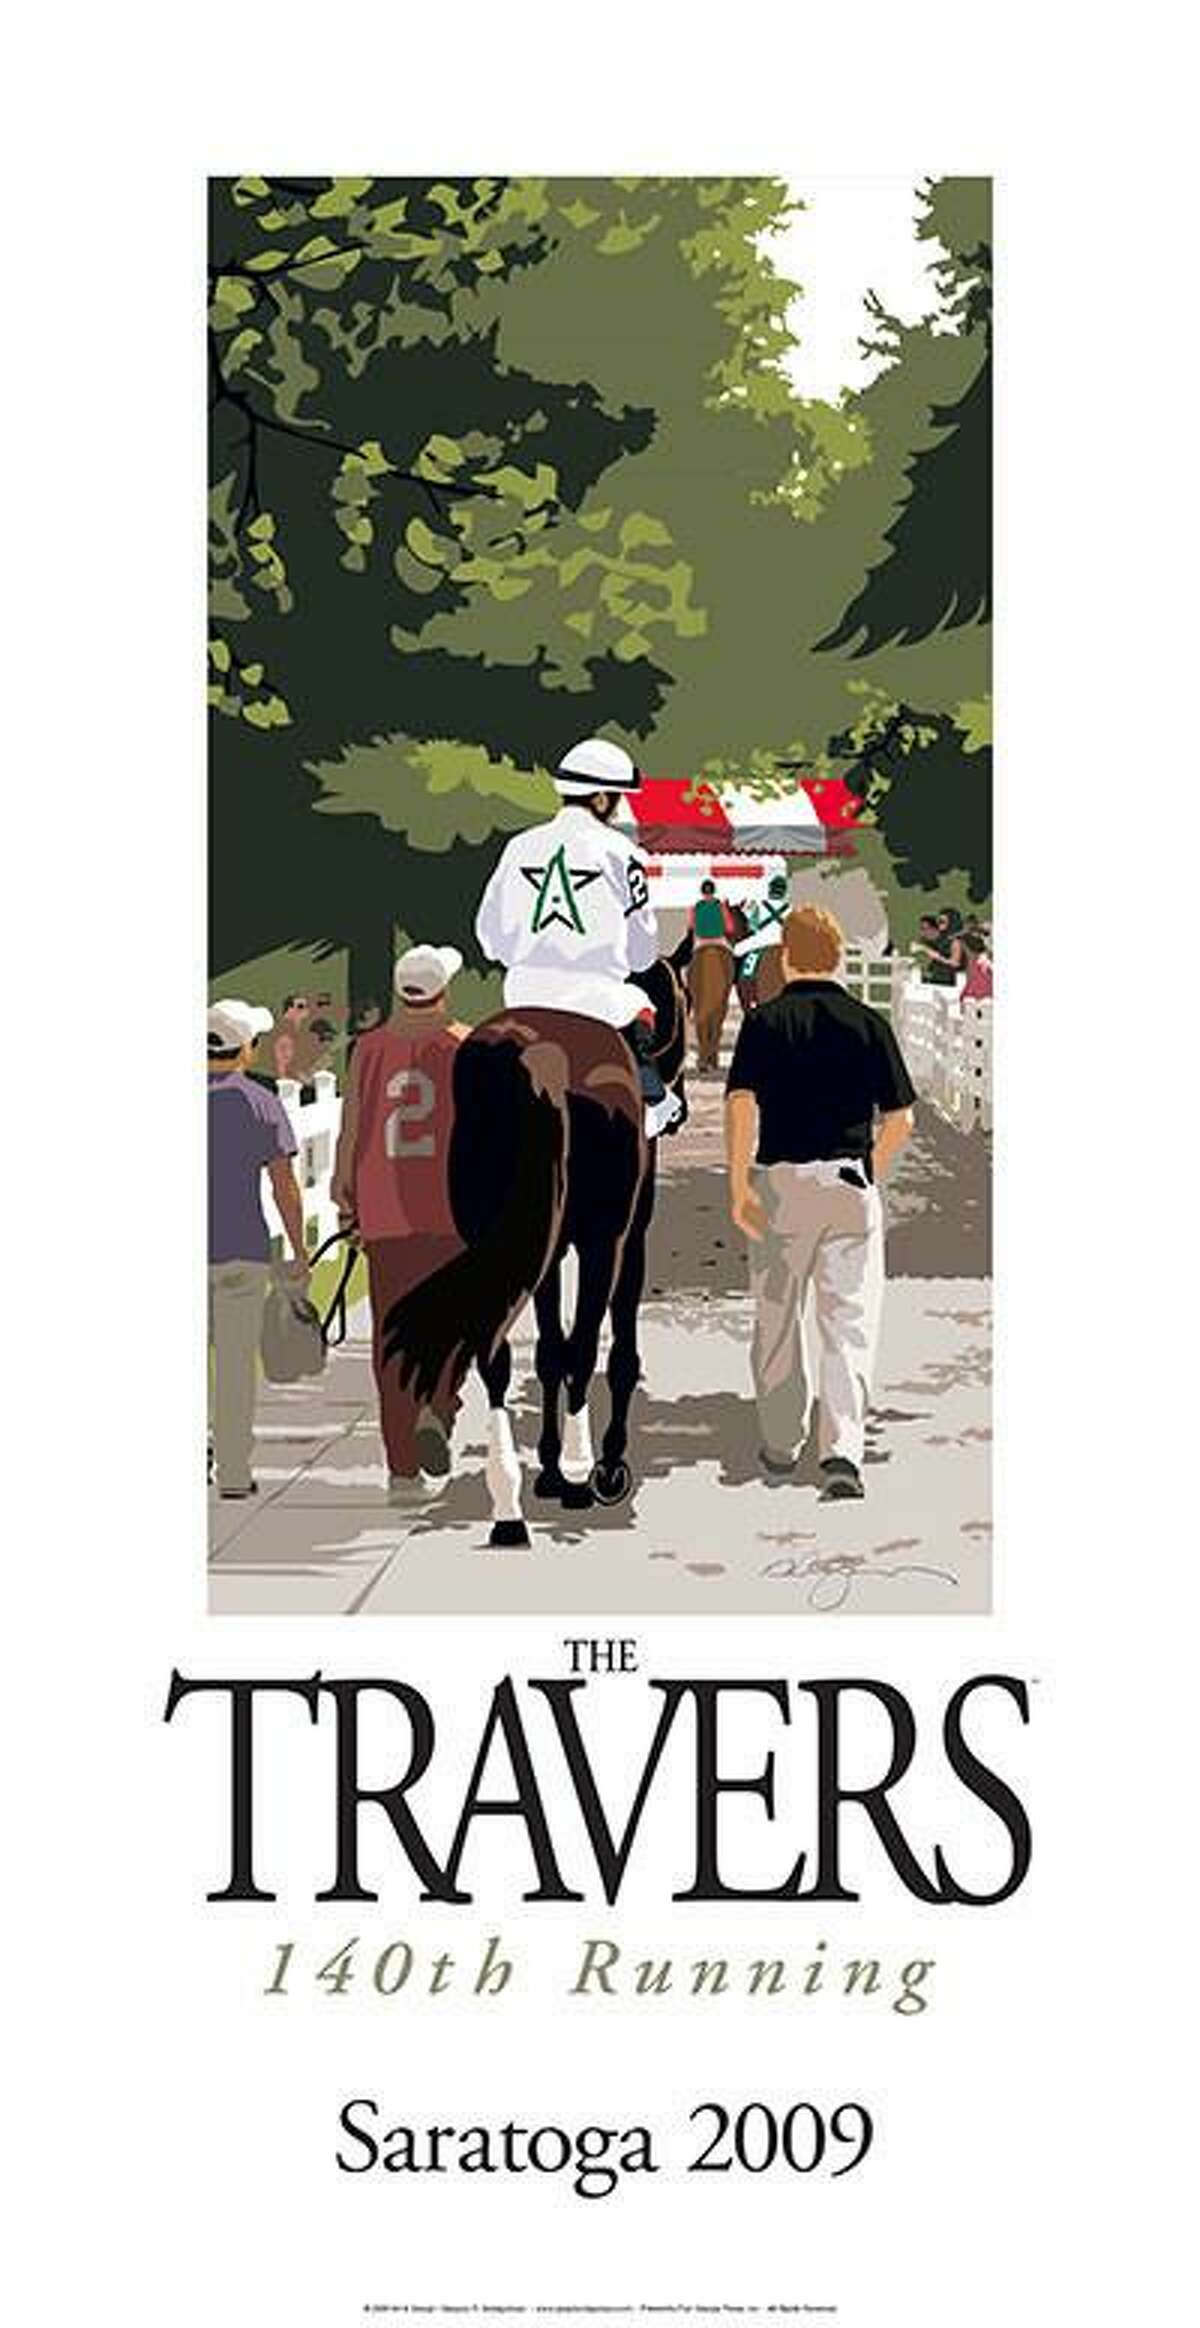 Travers posters through the years